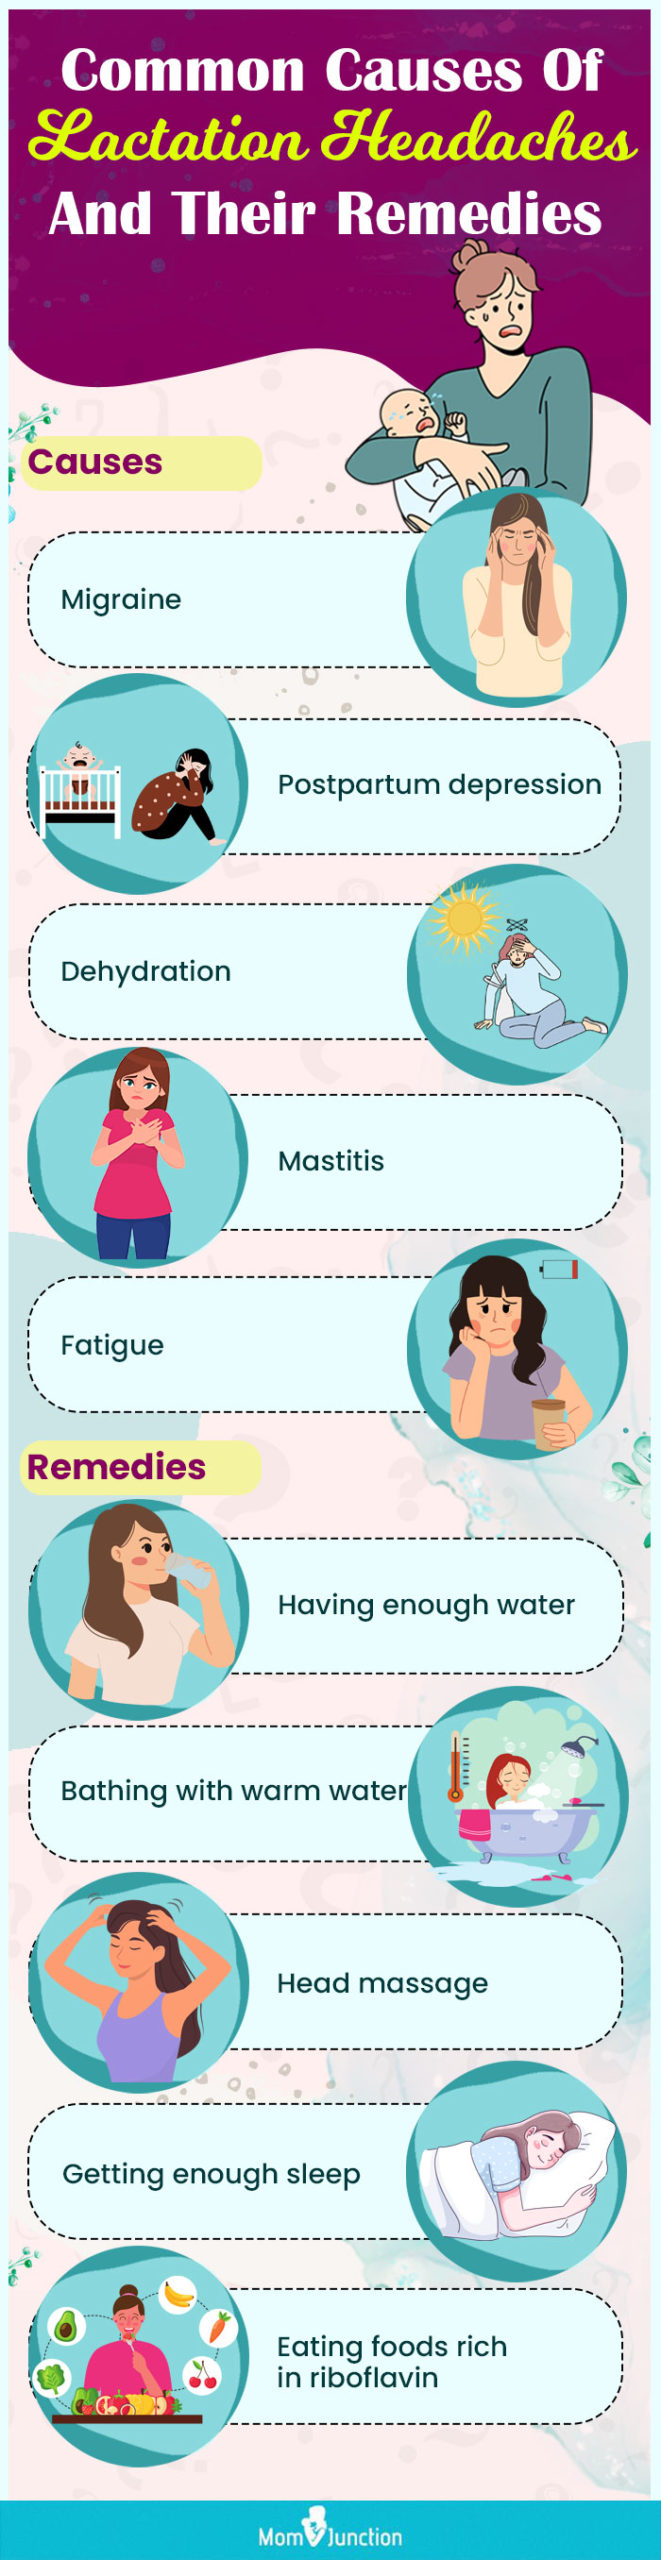 common causes of lactation headaches and their remedies [infographic]